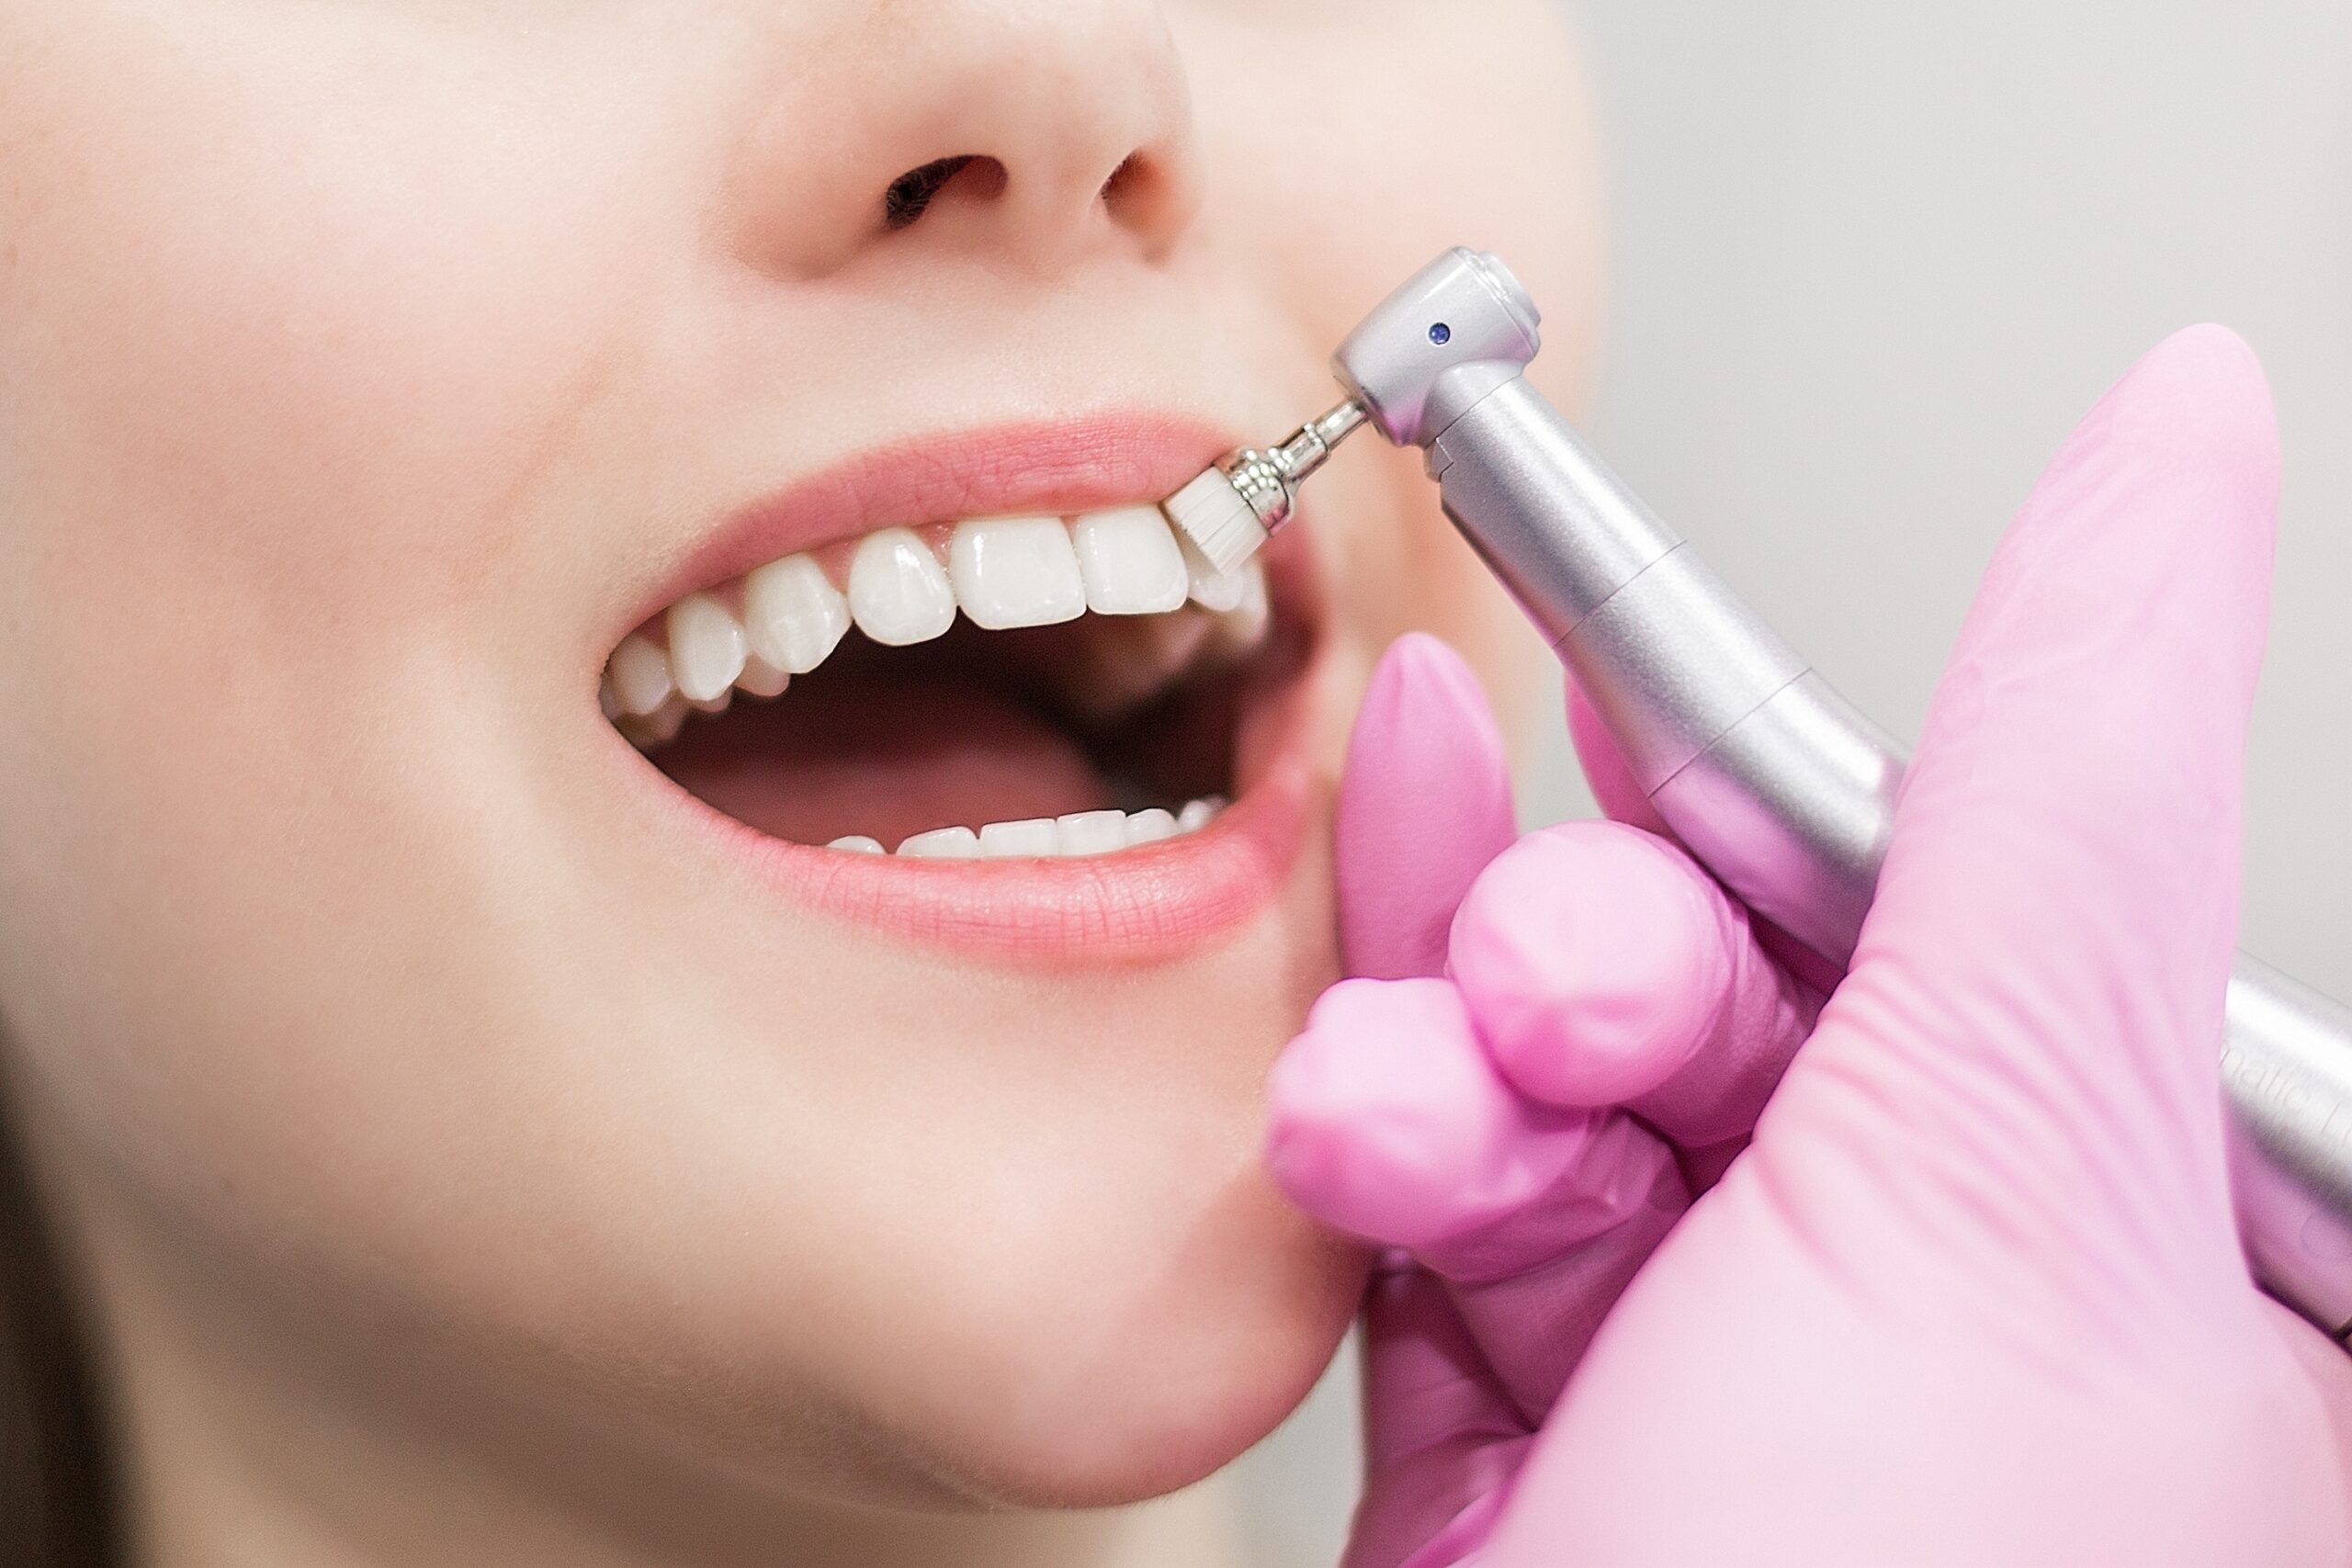 Young women is getting a dental scaling and polishing treatment